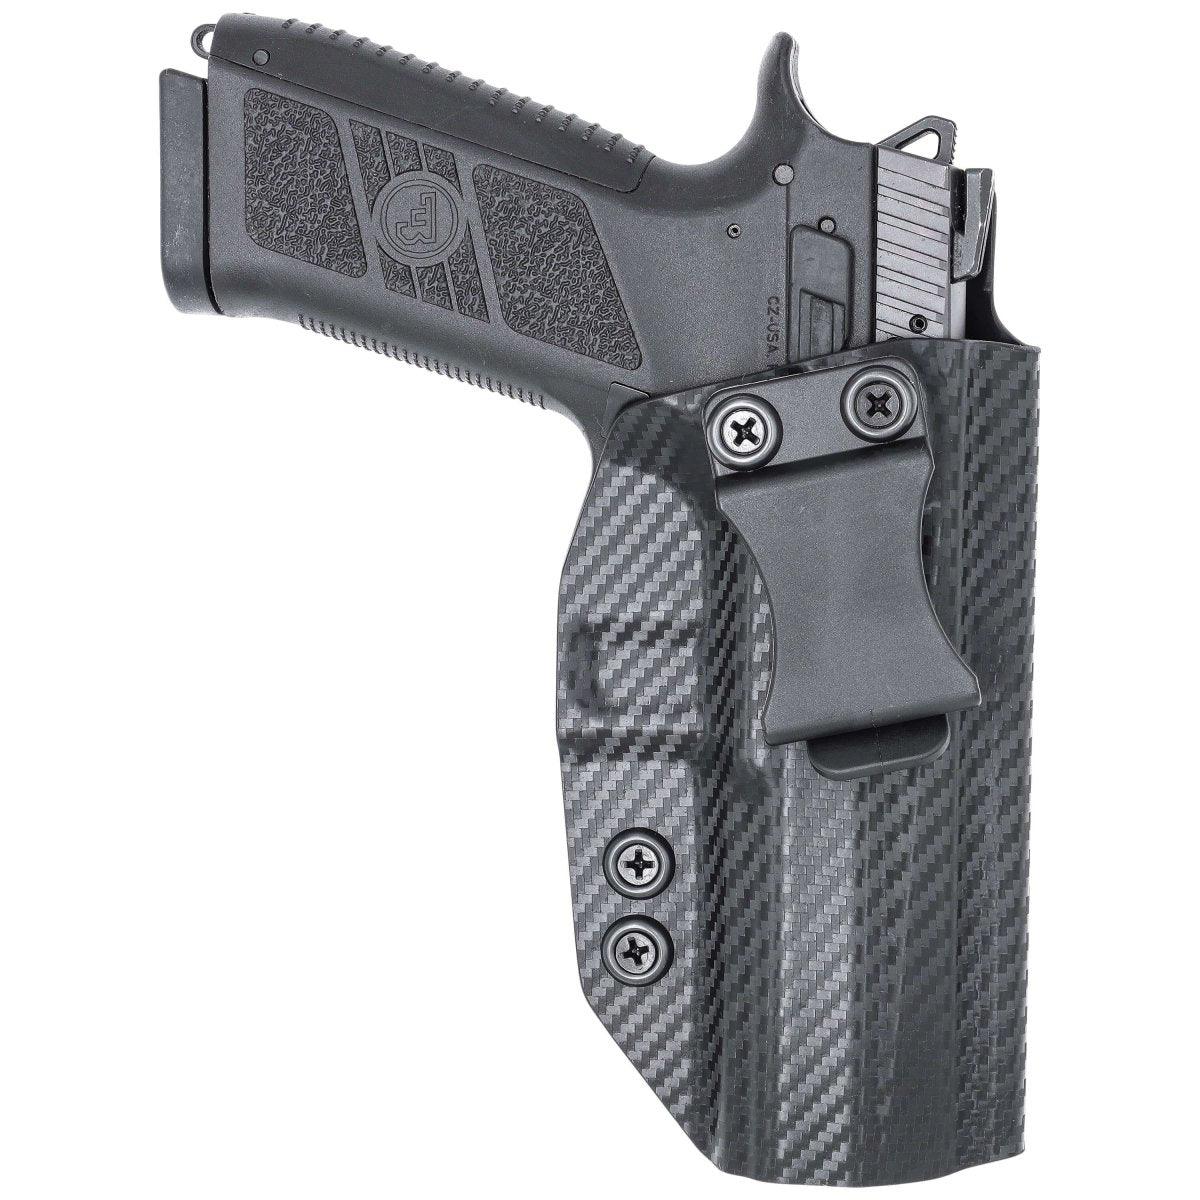 CZ P-09 KYDEX Holsters